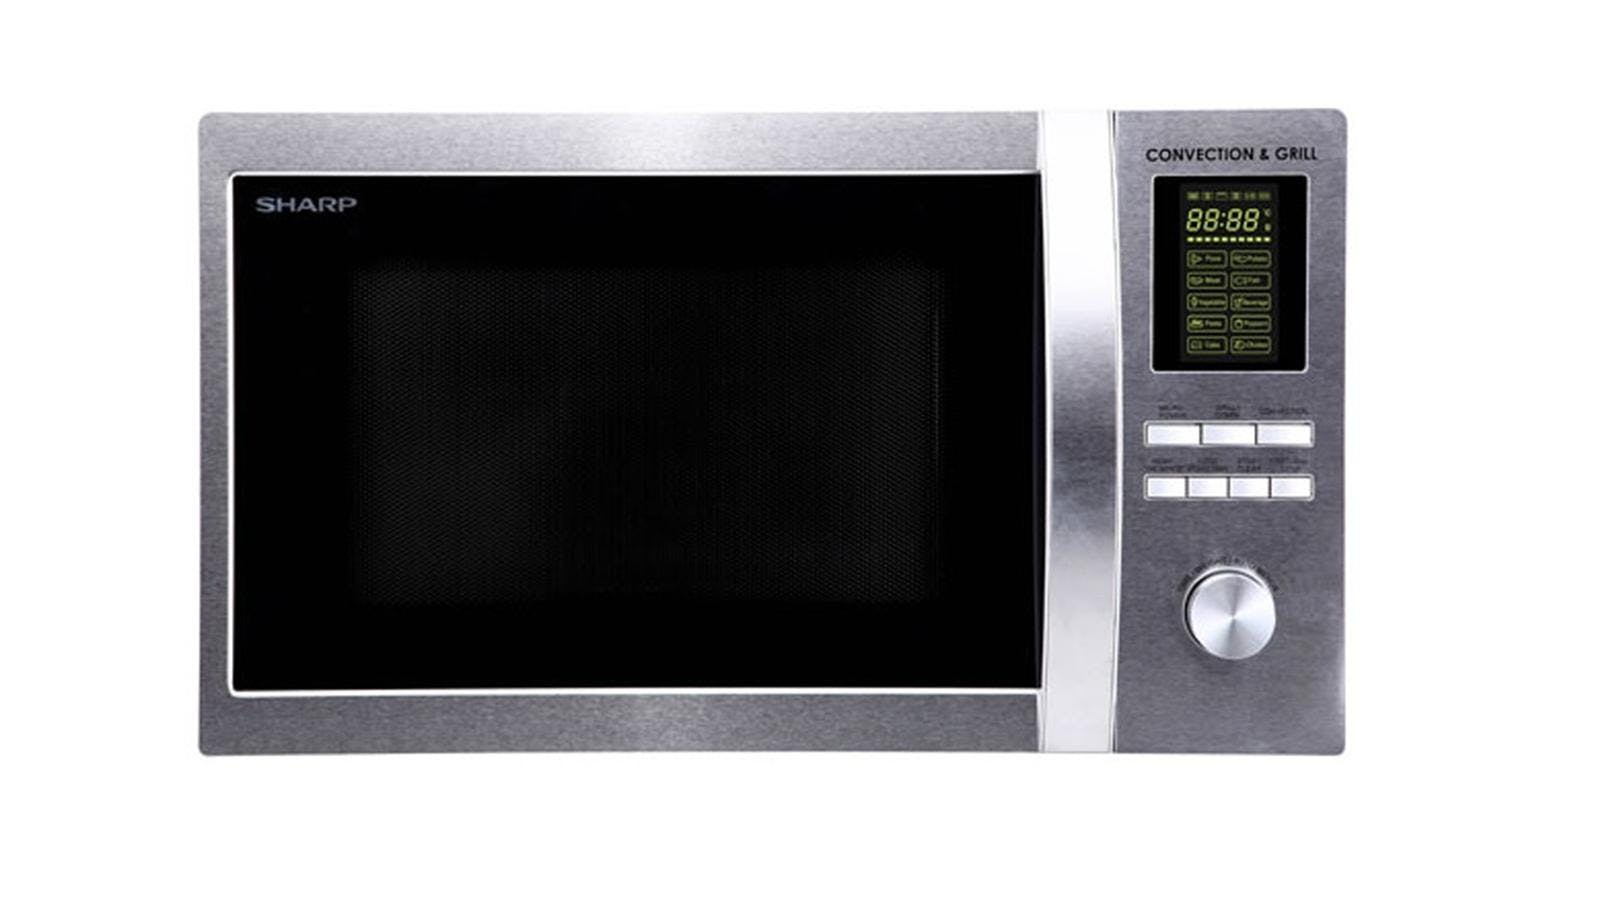 Sharp 32L Microwave Oven with Convection/ Infrared Grill | Harvey